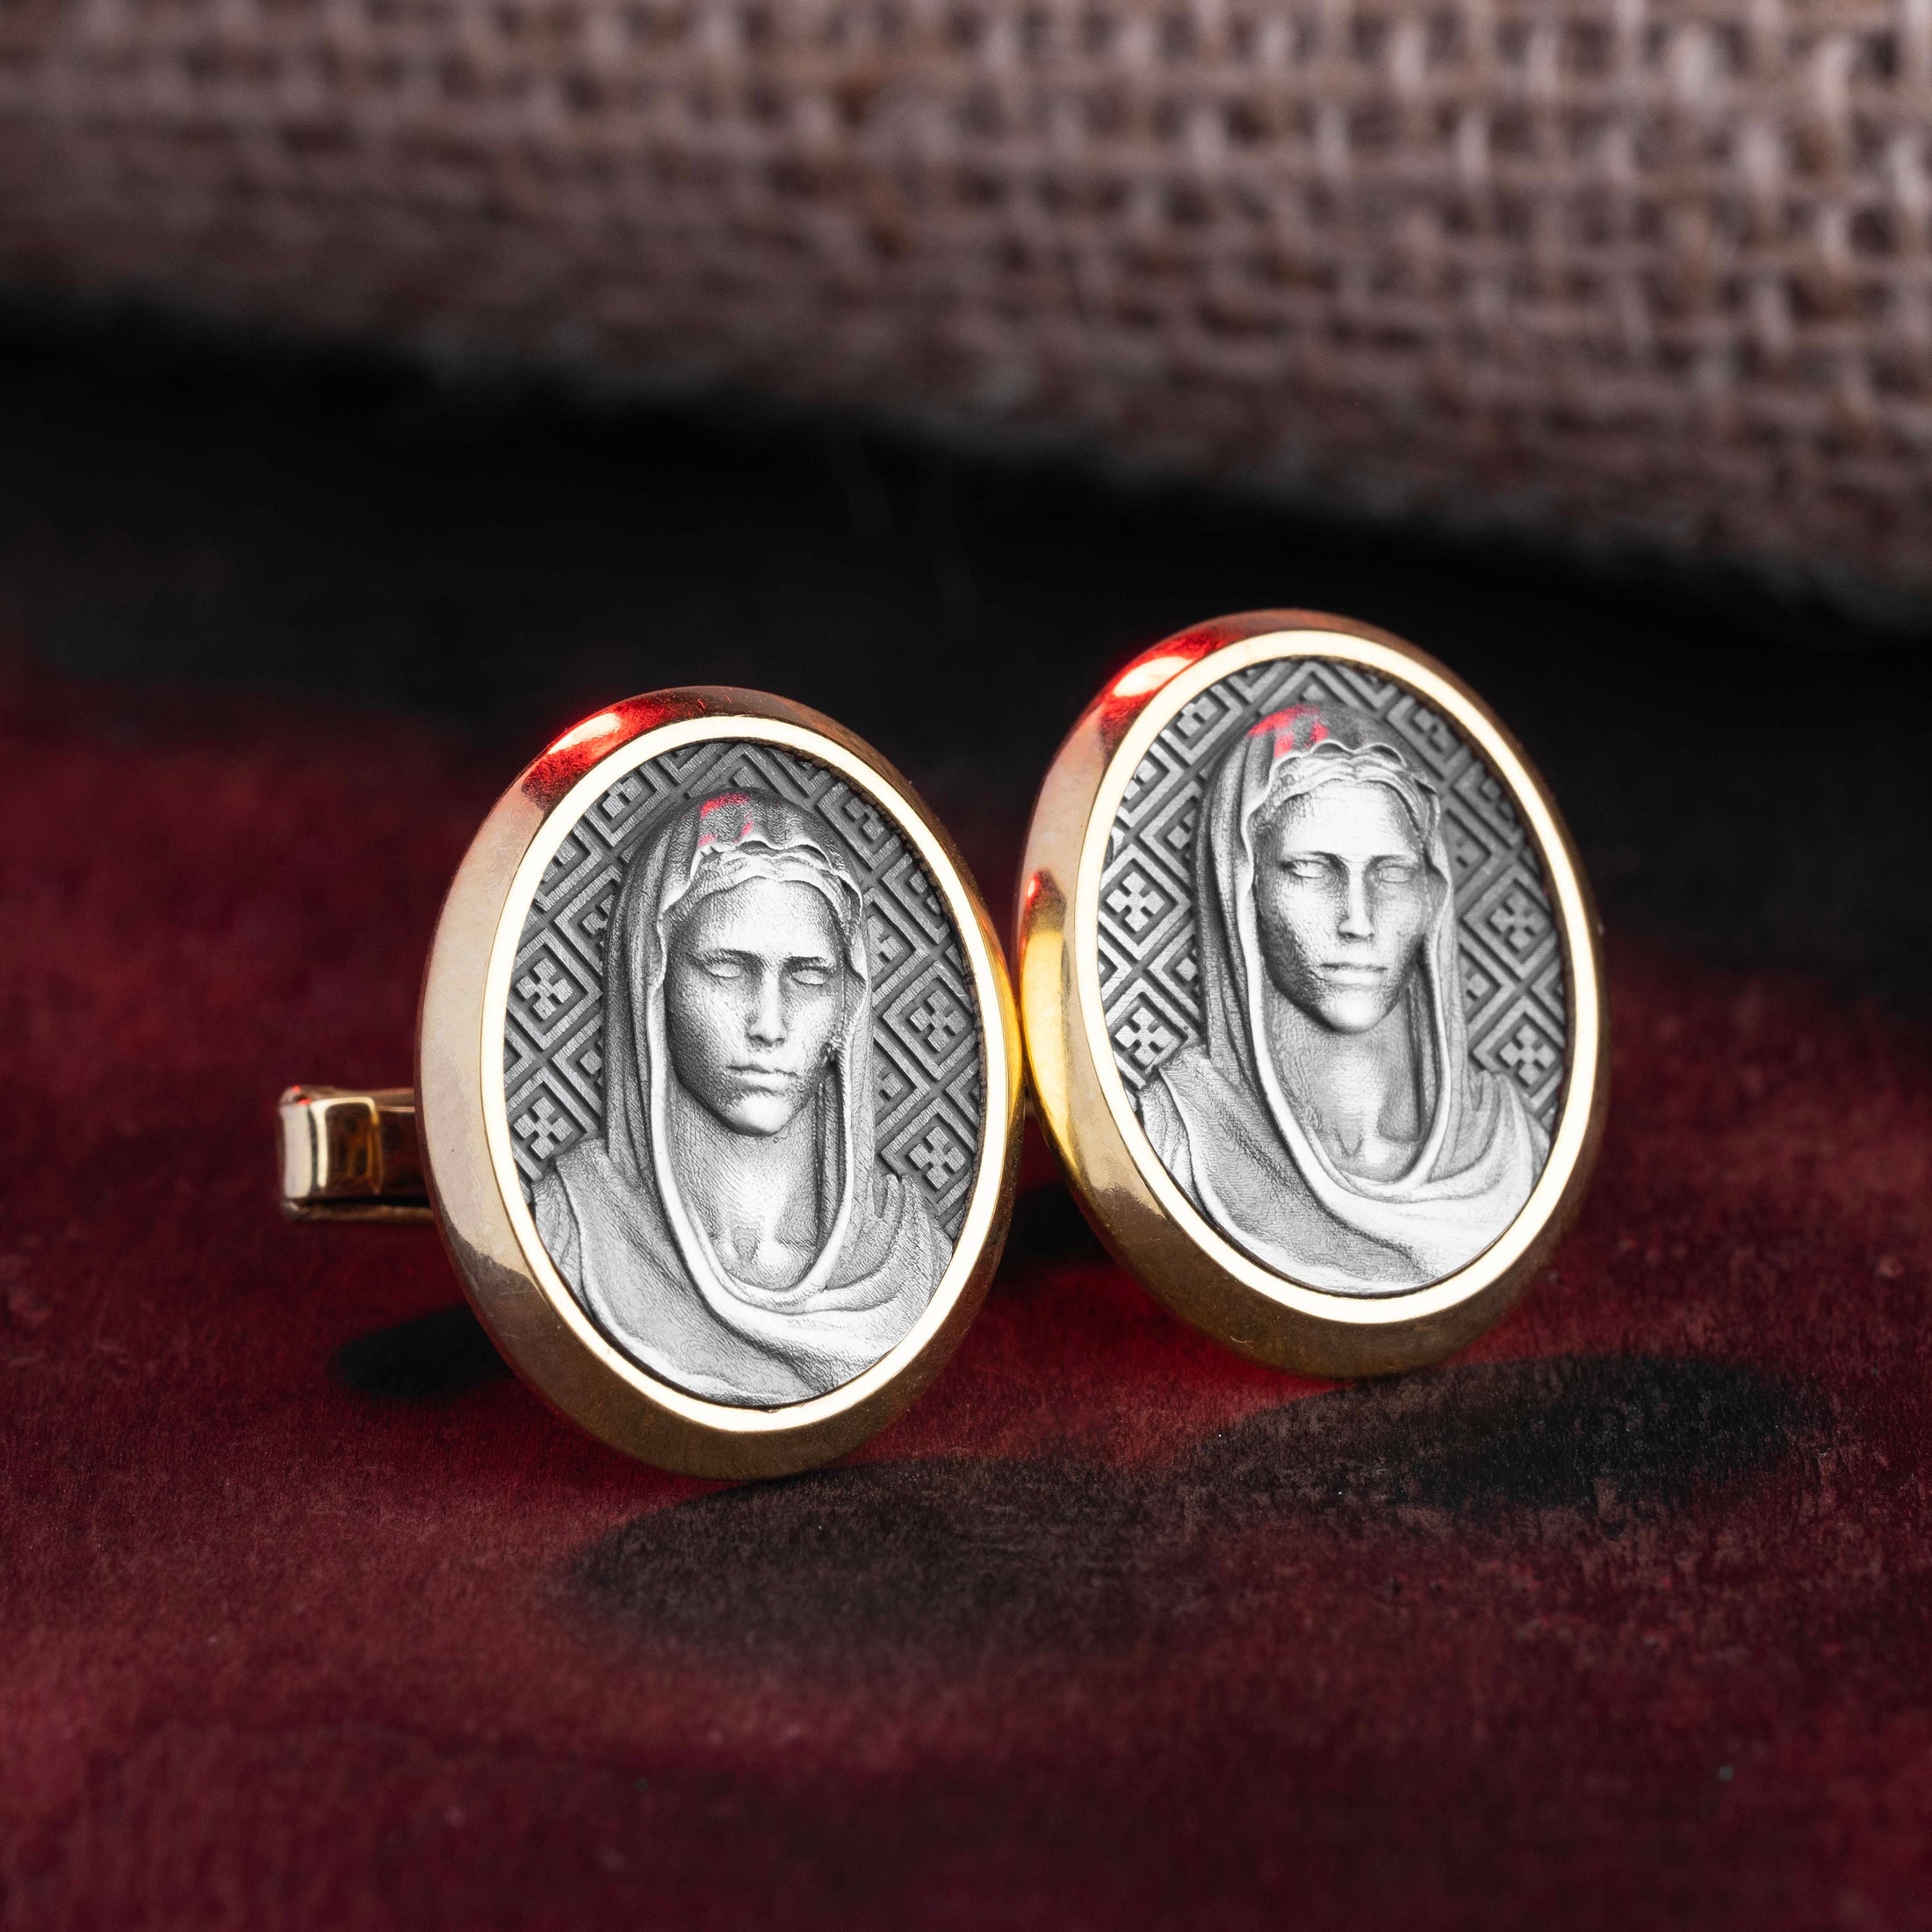 Miraculous Medal Cuff Links, Blessed Virgin Mary, Mother Of God, Memorial Gift, Engraved Cufflinks, Catholic Cufflinks, Religious Gift